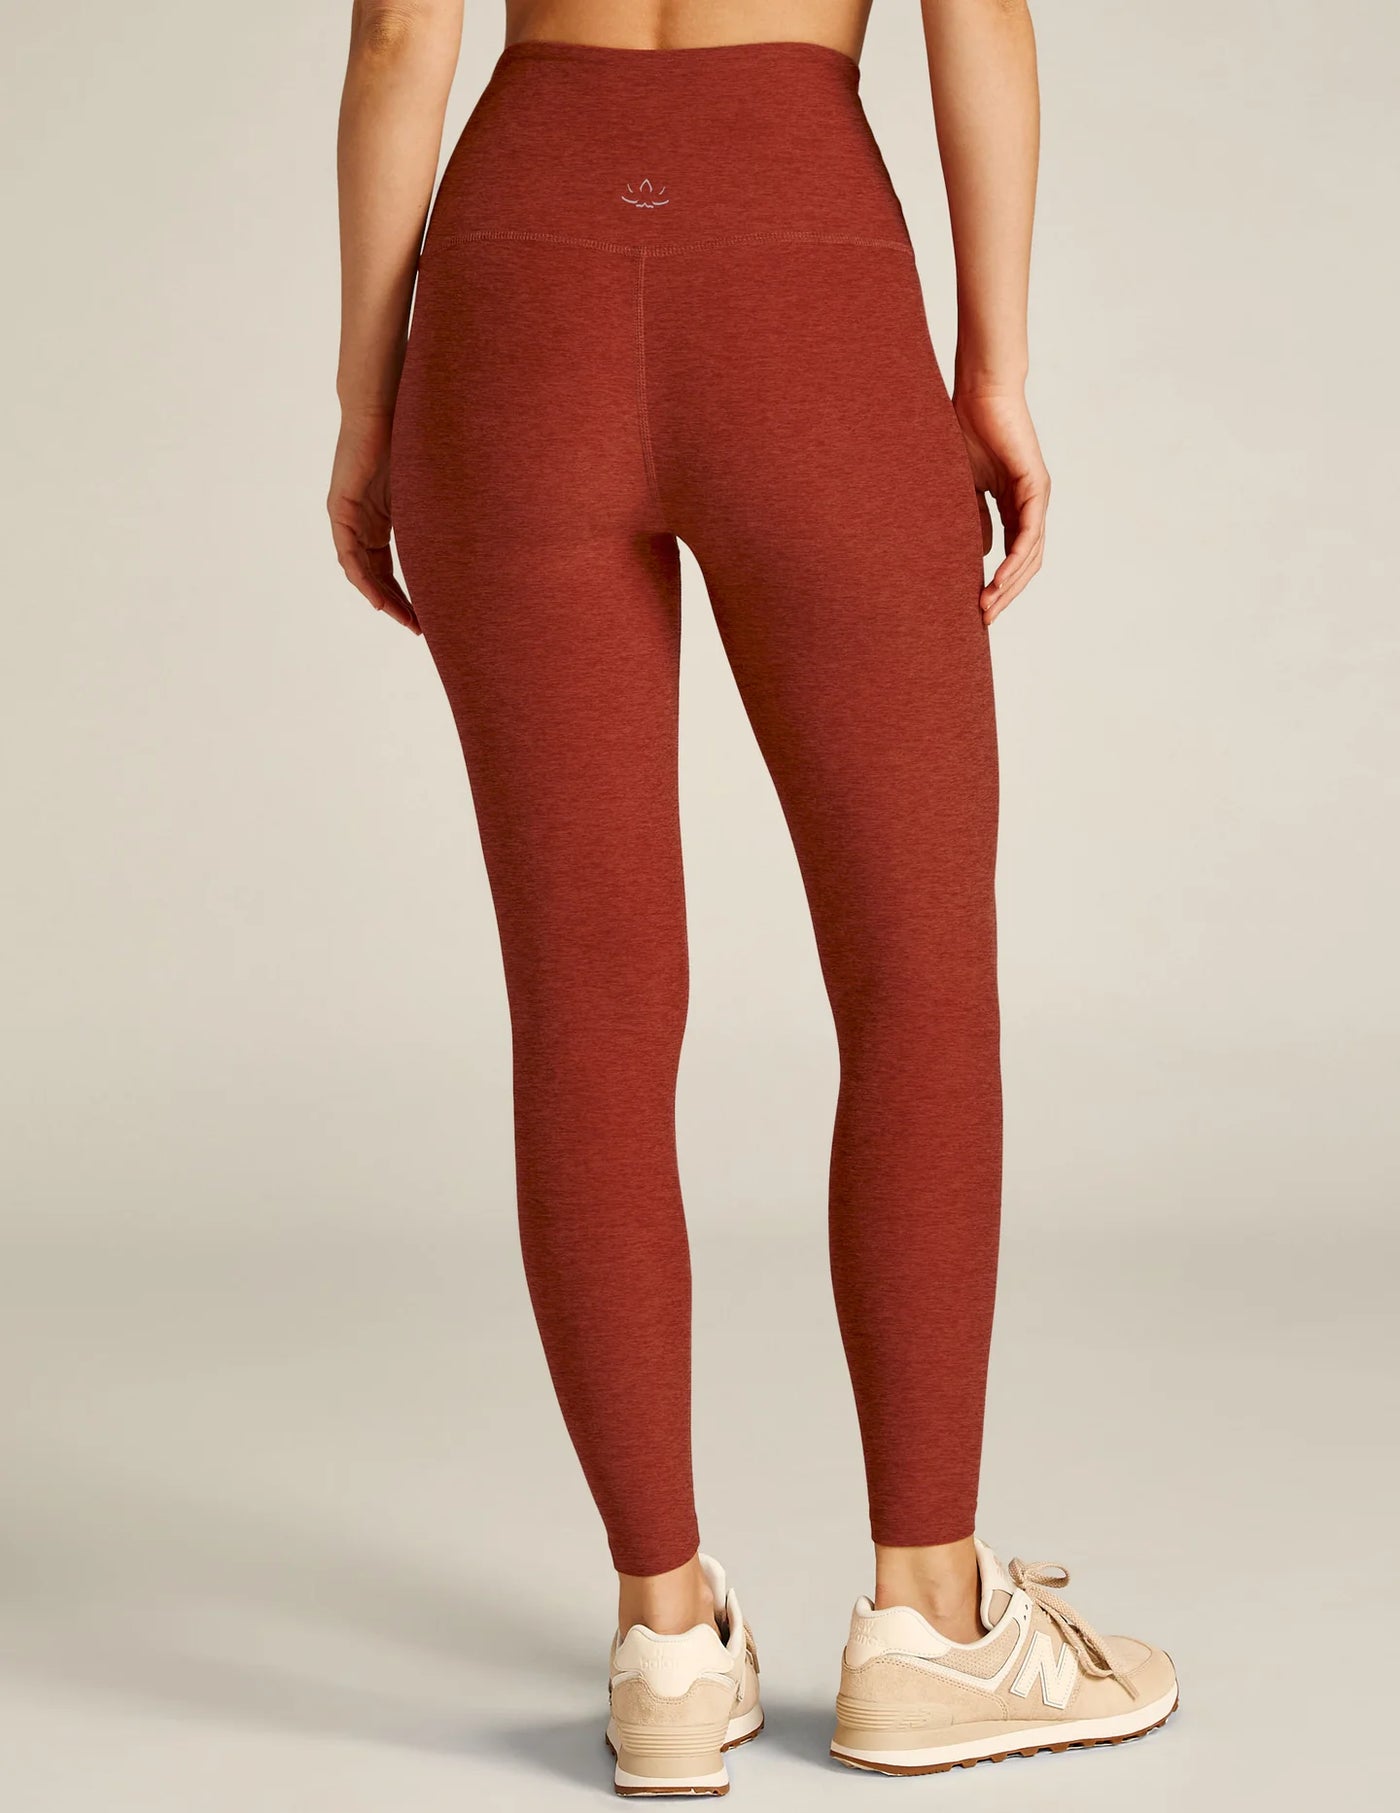 Beyond Yoga Caught in the Midi Legging - Red Sand Heather